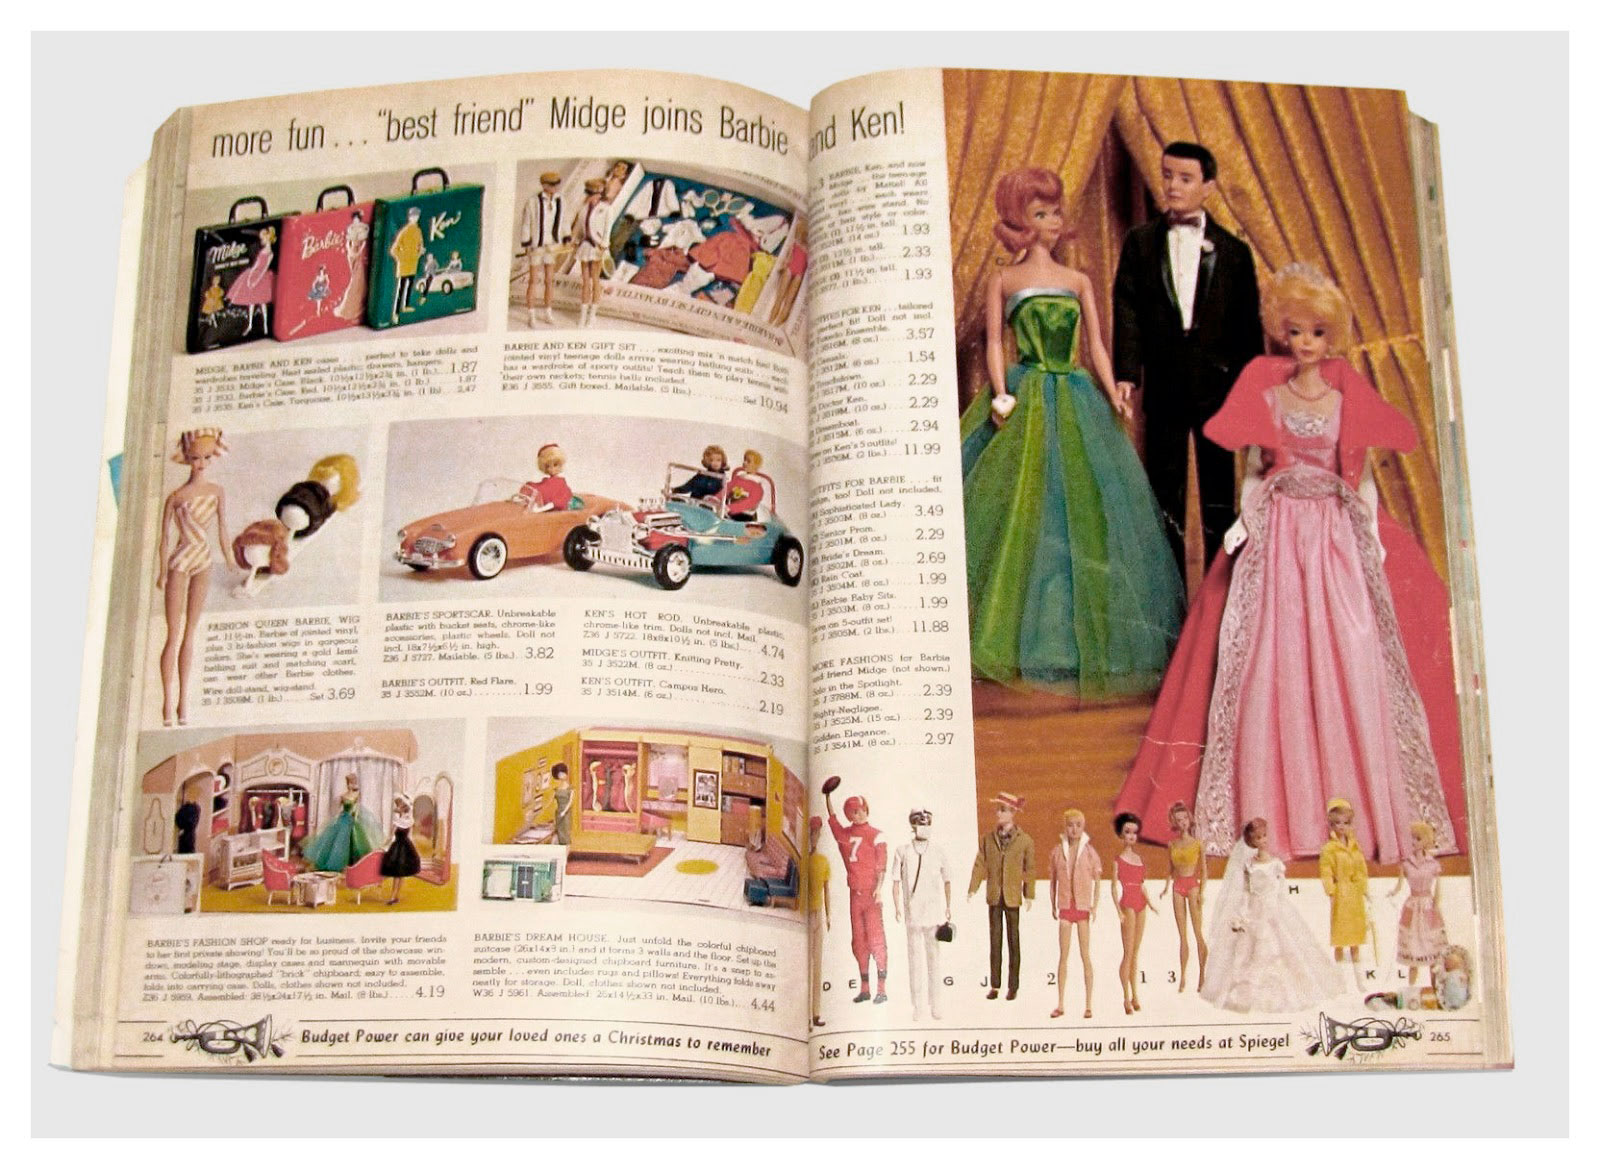 From 1963 Spiegel Christmas catalogue